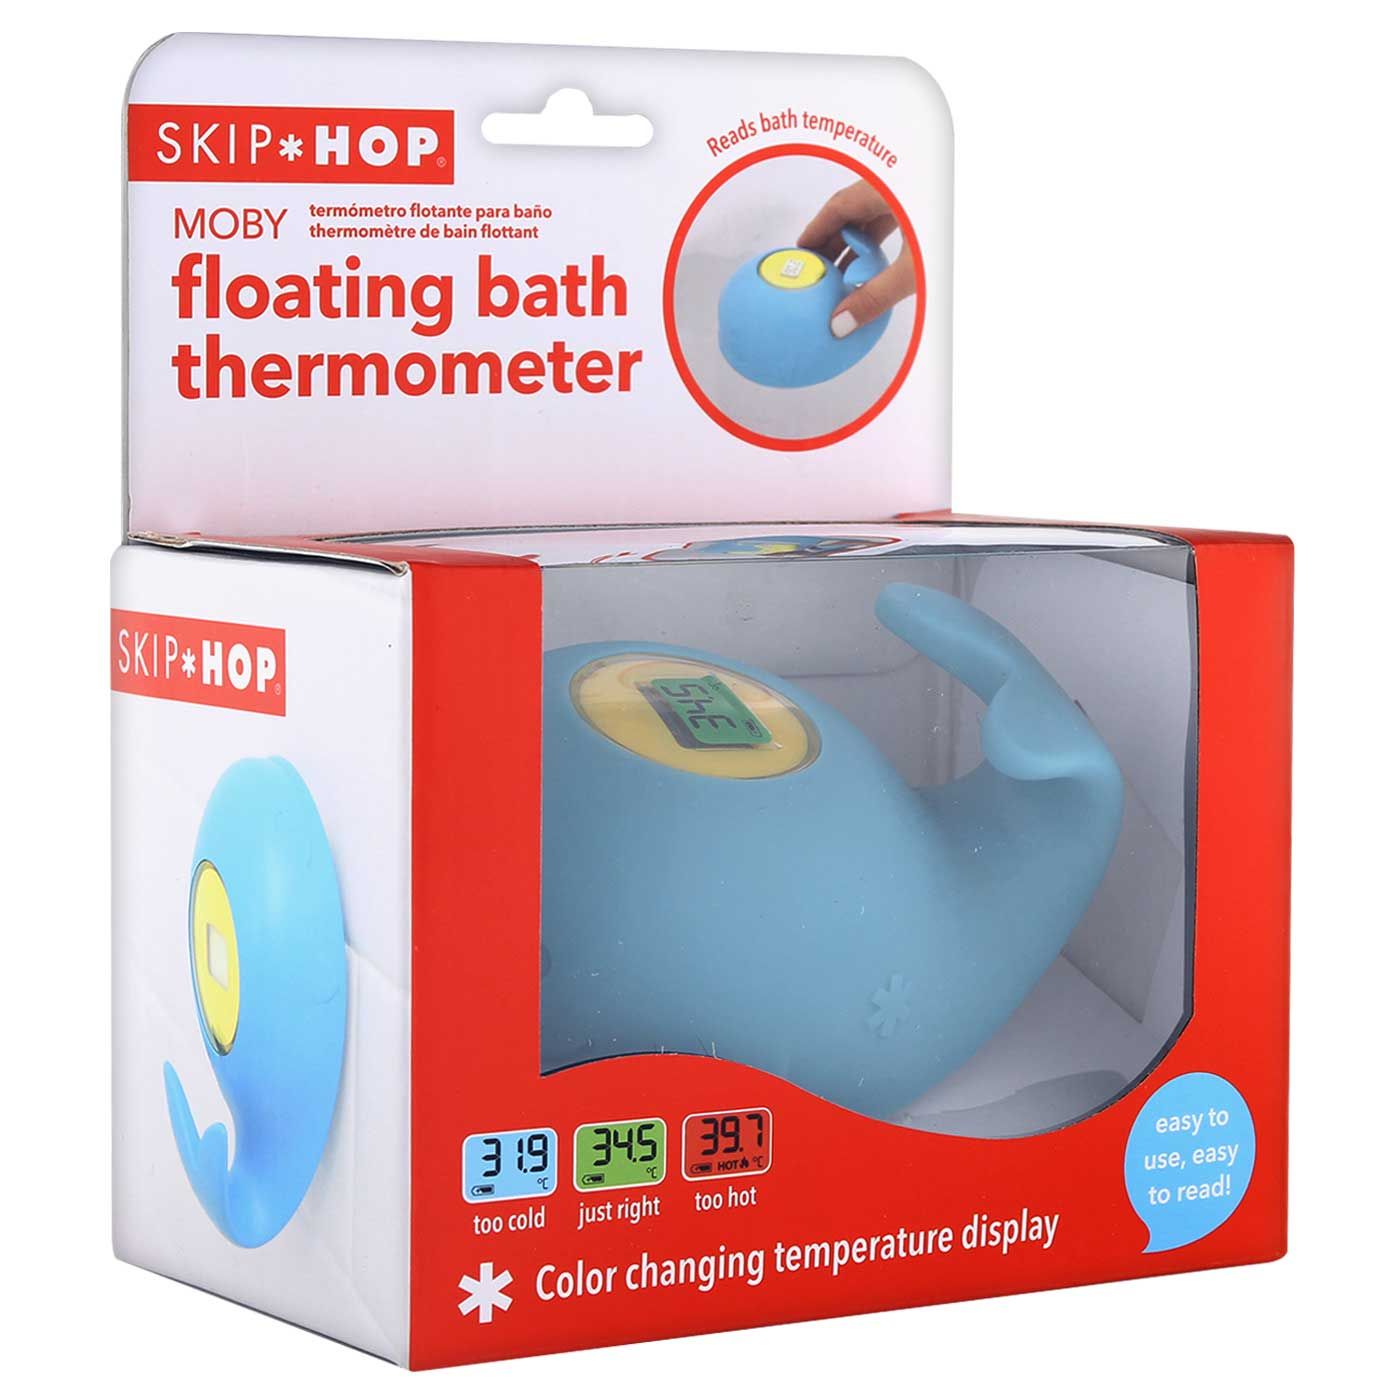 Skiphop Moby Bath Thermometer - 5